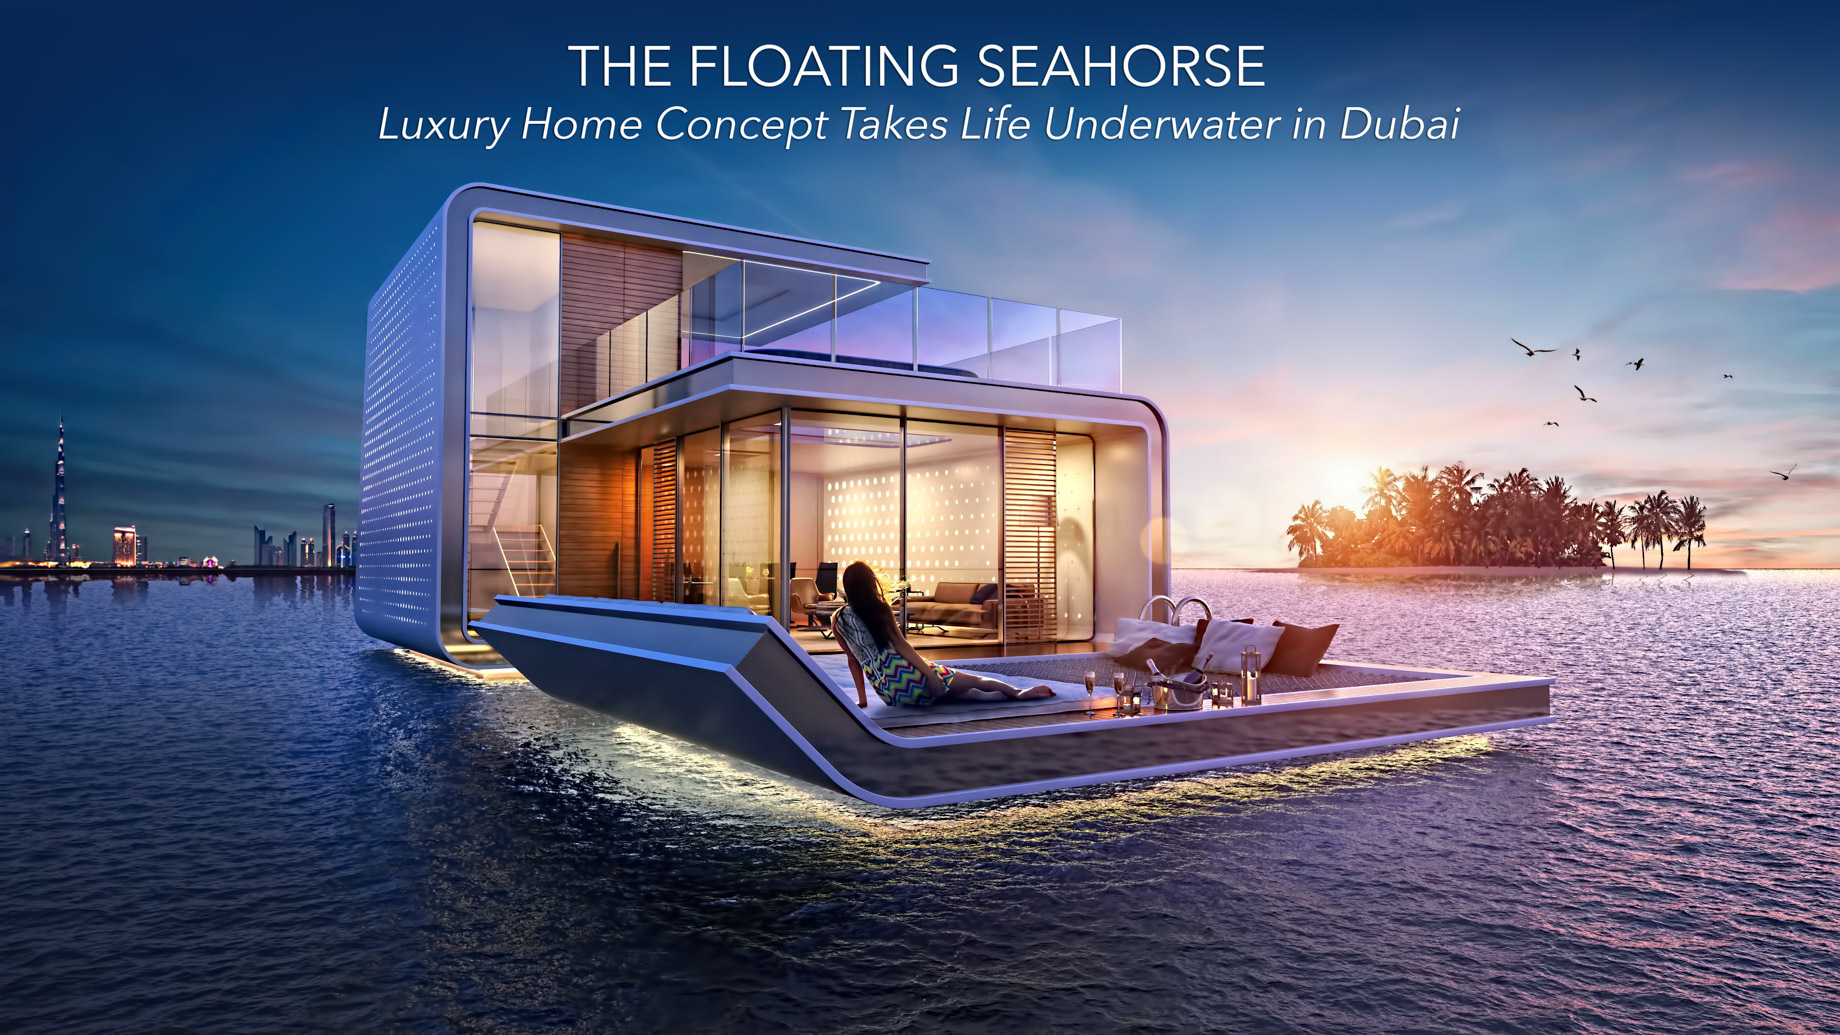 The Floating Seahorse – Luxury Home Concept Takes Life Underwater in Dubai